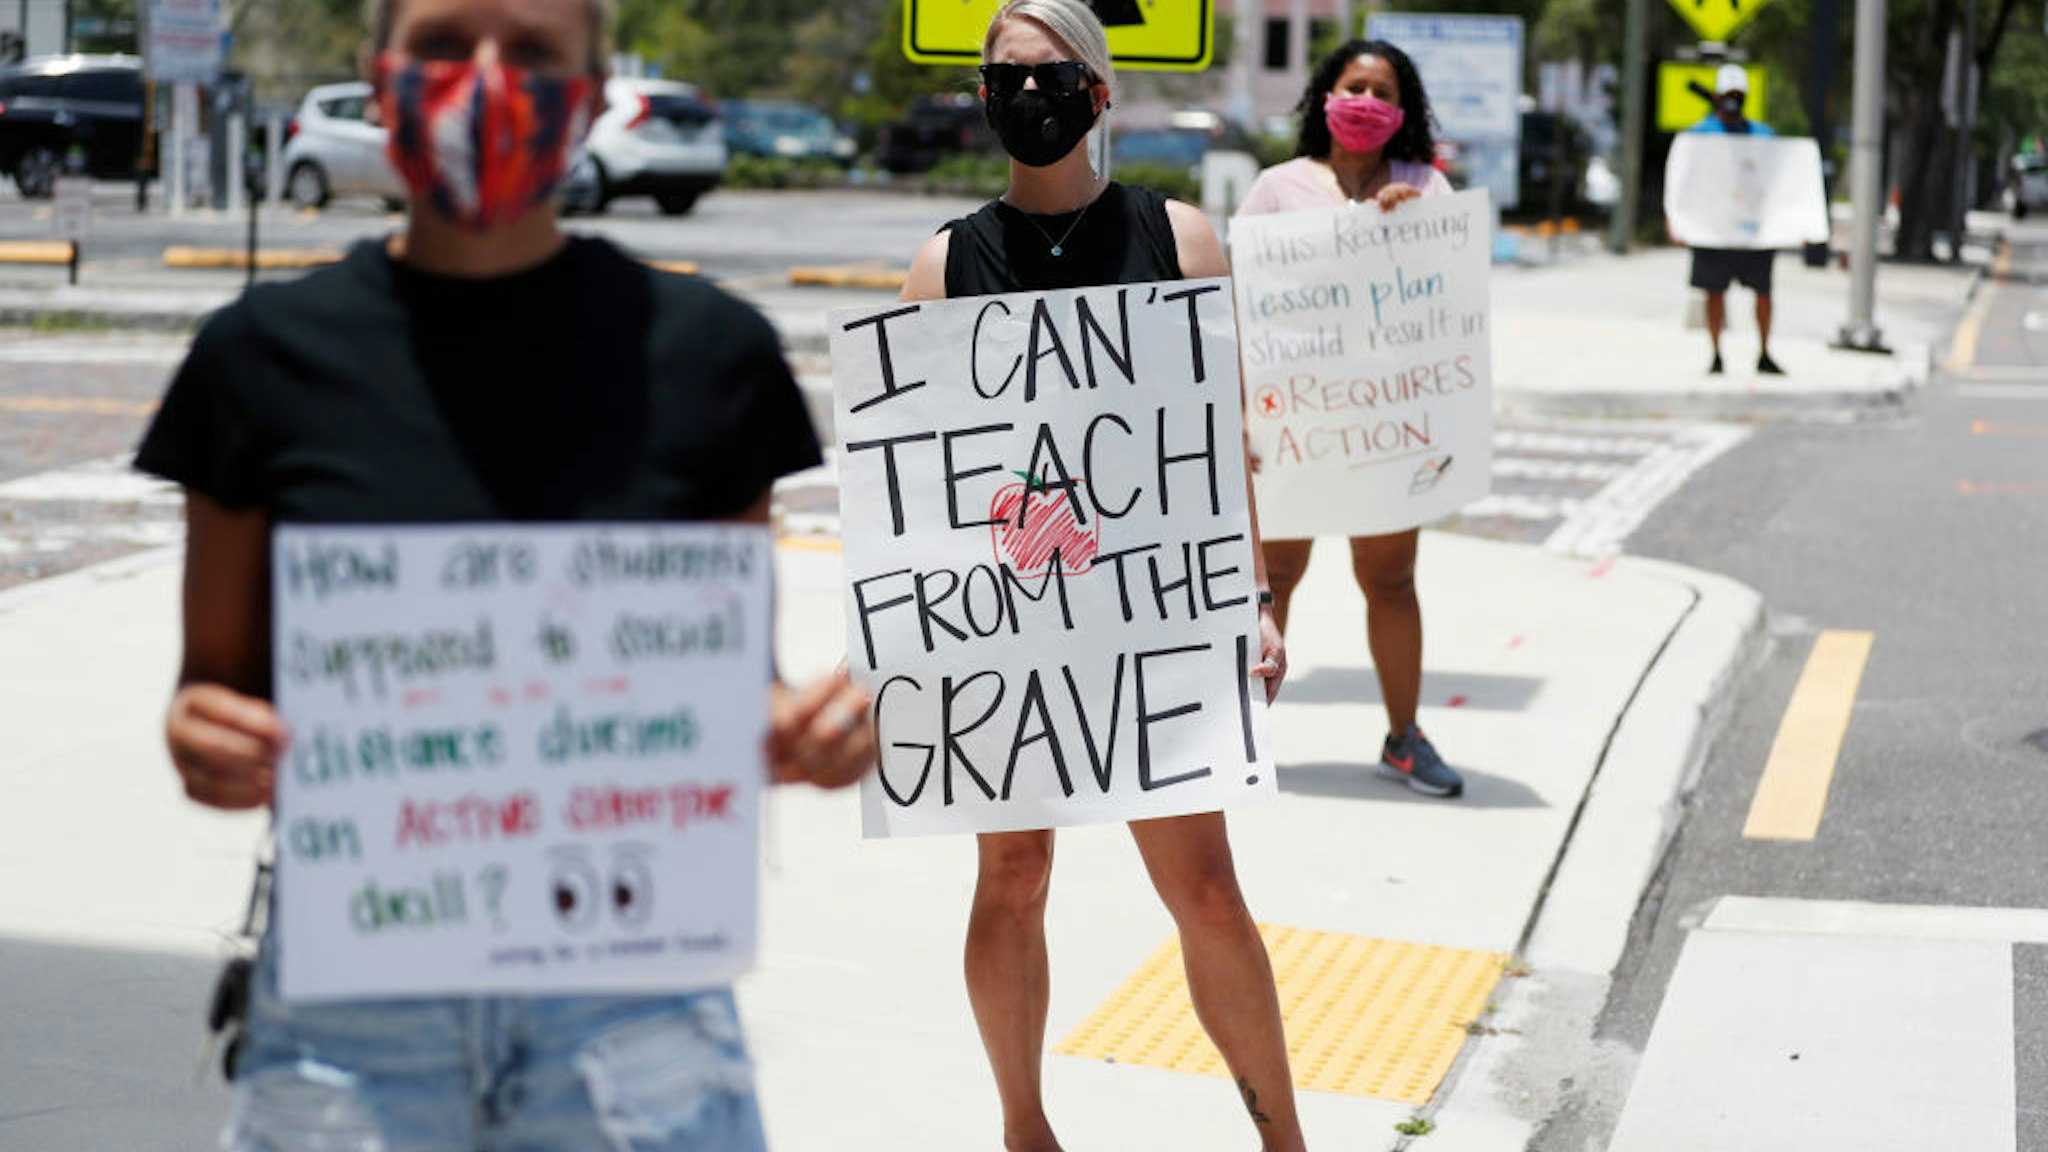 TAMPA, FL - JULY 16: Middle school teacher Brittany Myers, (C) stands in protest in front of the Hillsborough County Schools District Office on July 16, 2020 in Tampa, Florida. Teachers and administrators from Hillsborough County Schools rallied against the reopening of schools due to health and safety concerns amid the COVID-19 pandemic.